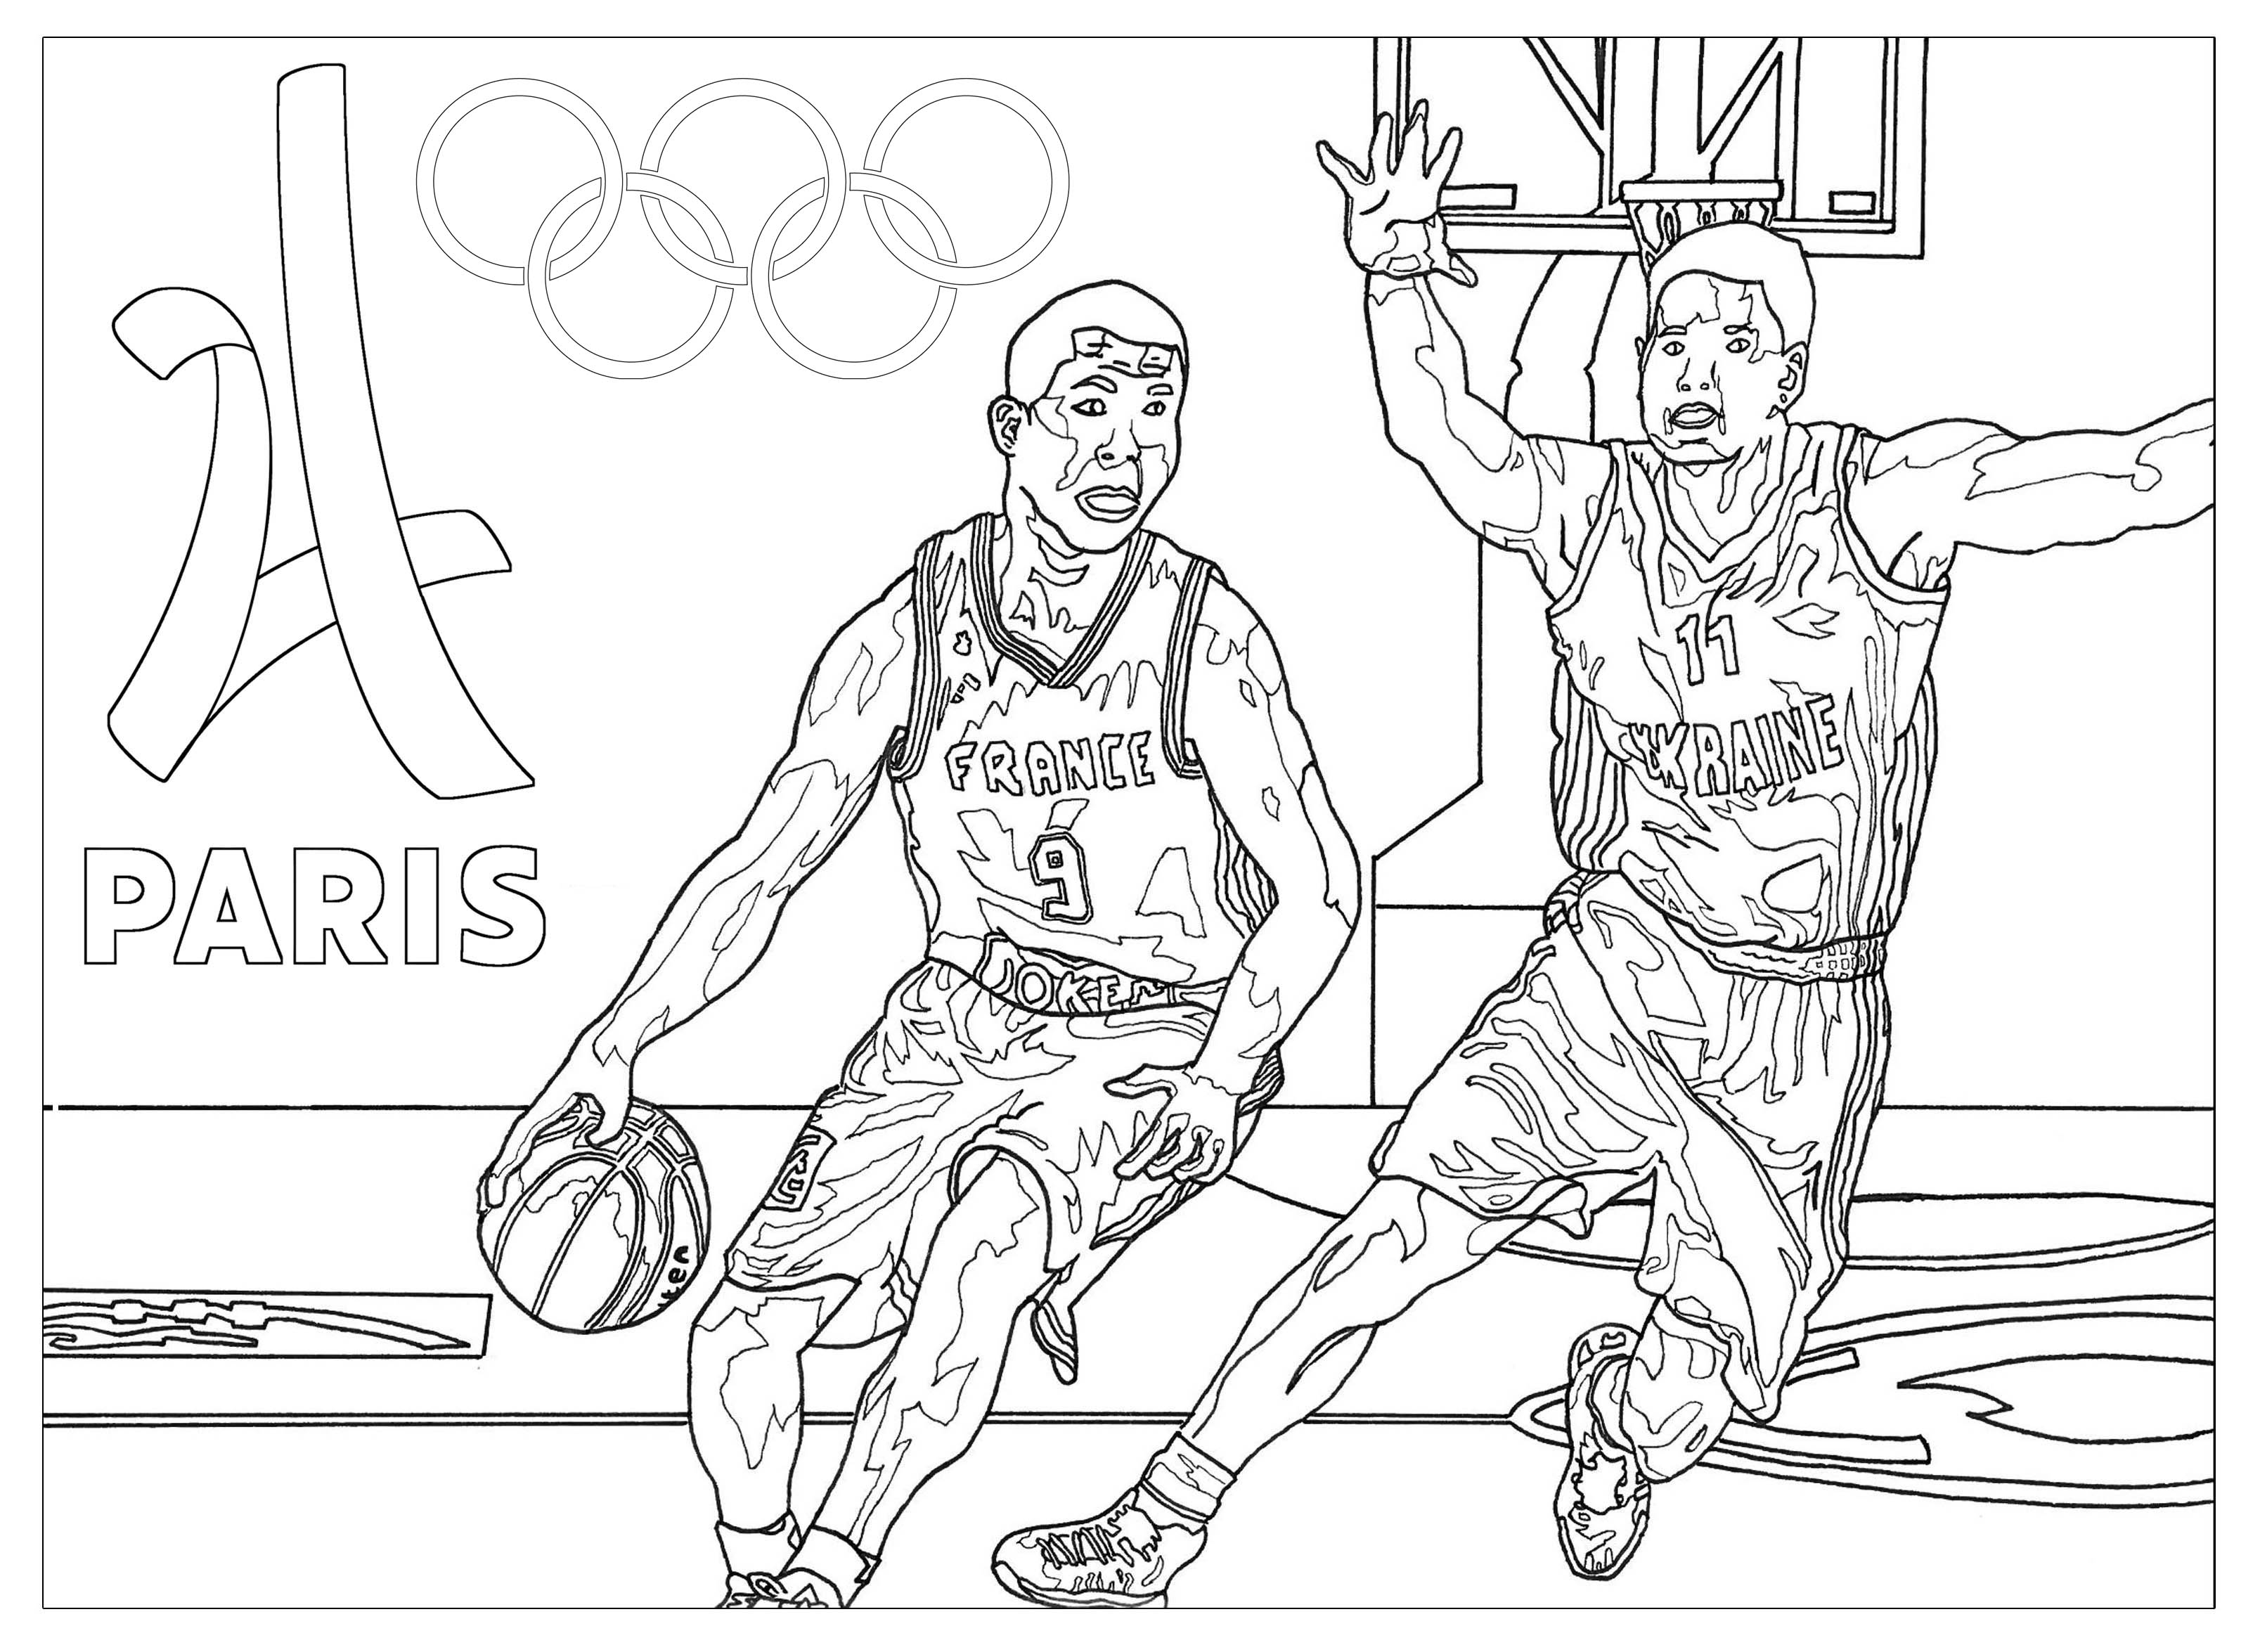 Coloring page for the 2024 Paris Olympic games : Basketball, Artist : Sofian